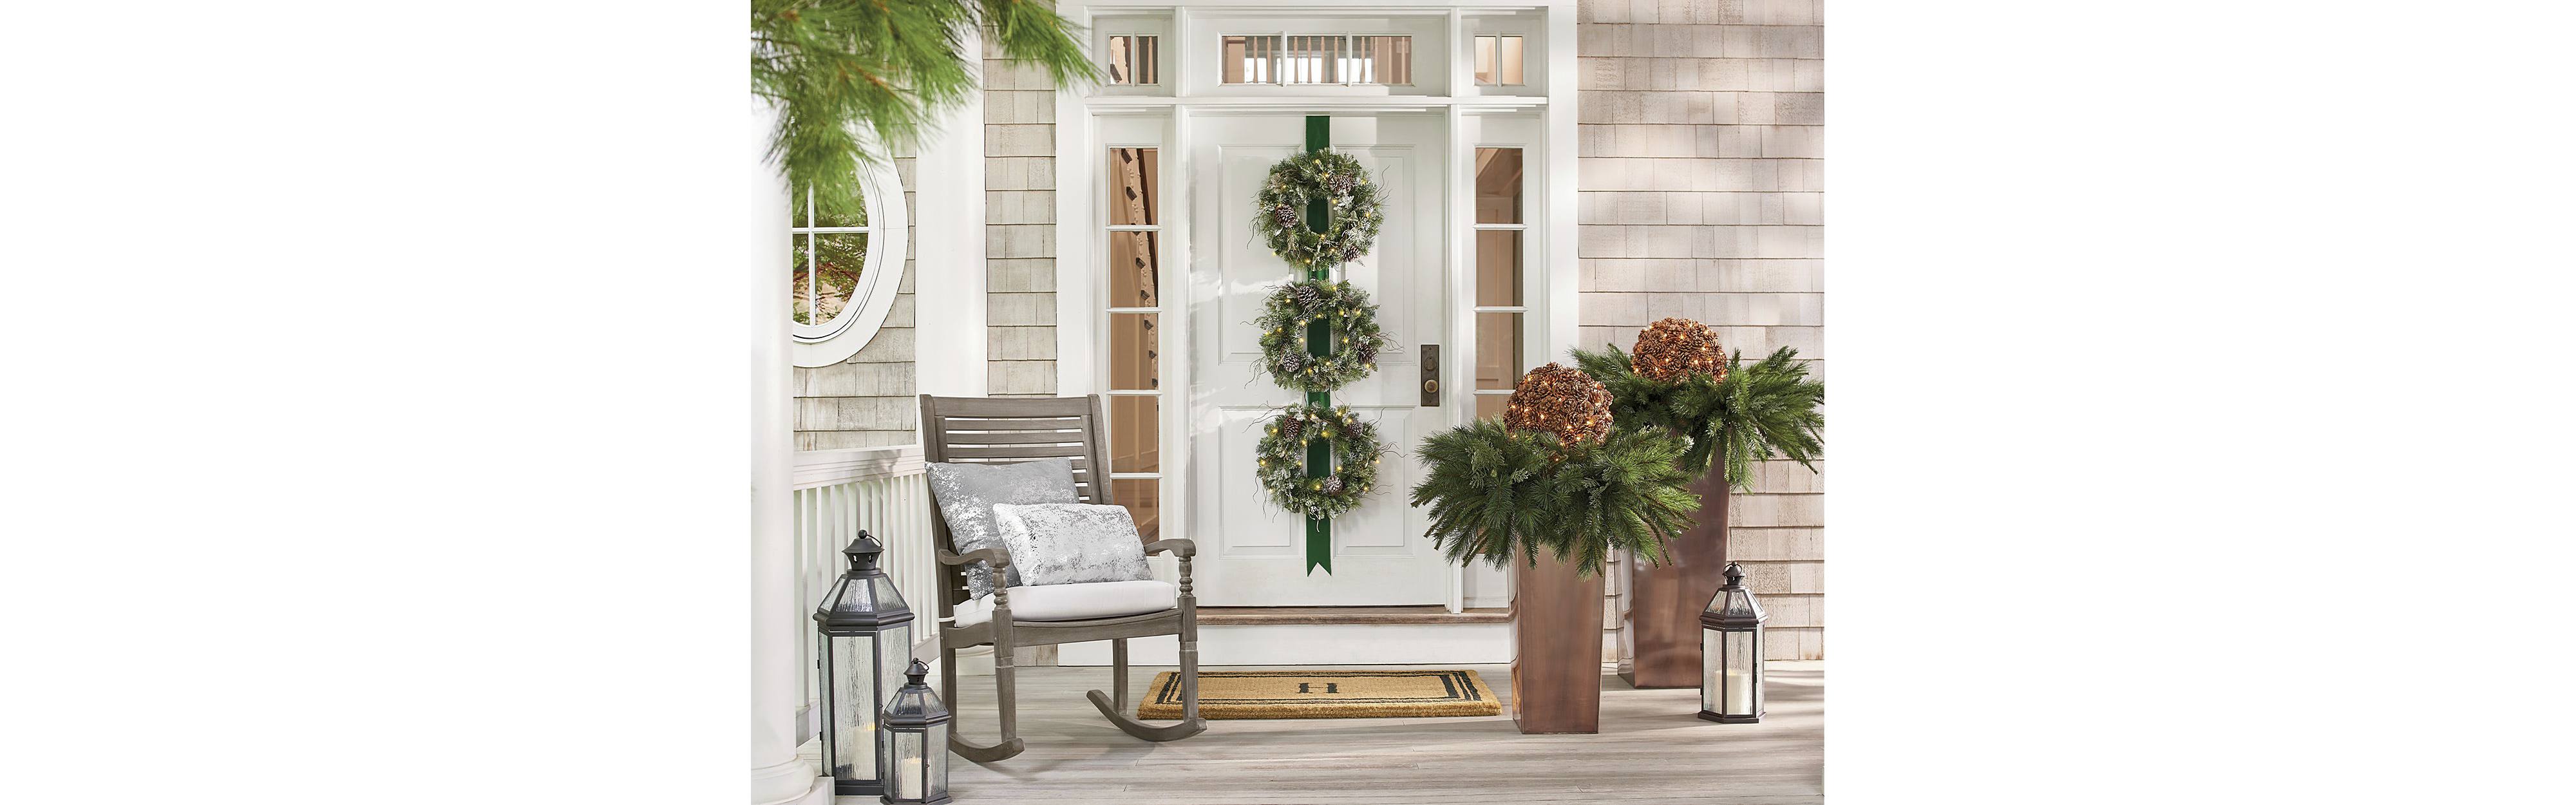 Front Porch Xmas Decor Ideas to Add Festive Cheer to Your Home!